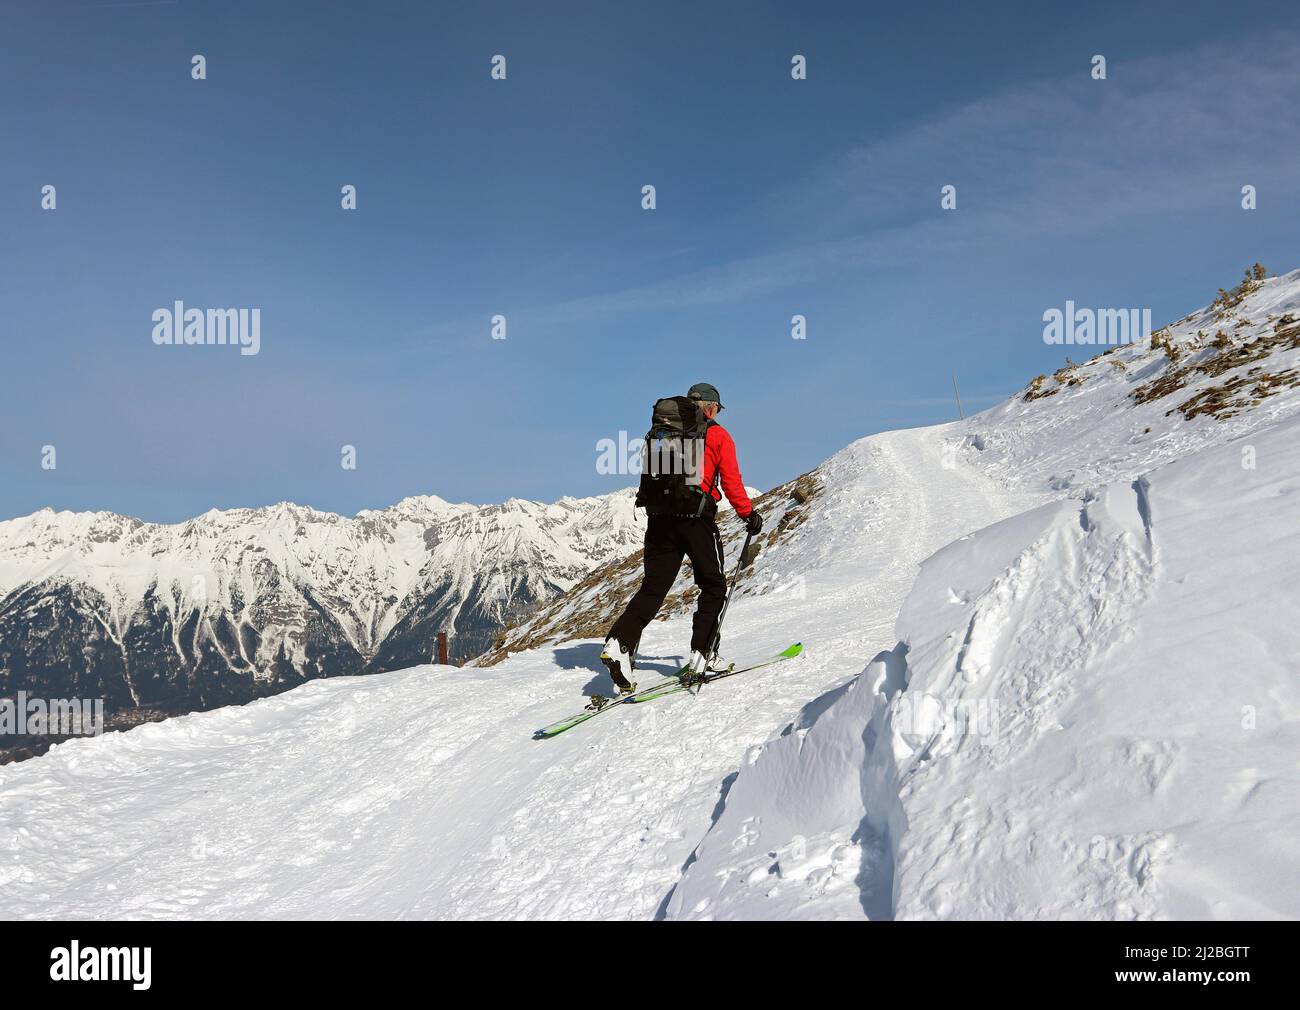 Generic image of a man carrying backpack and poles walking up a snowy mountain in skis against a blue sky (Patscherkofel, the Alps, Austria) Stock Photo